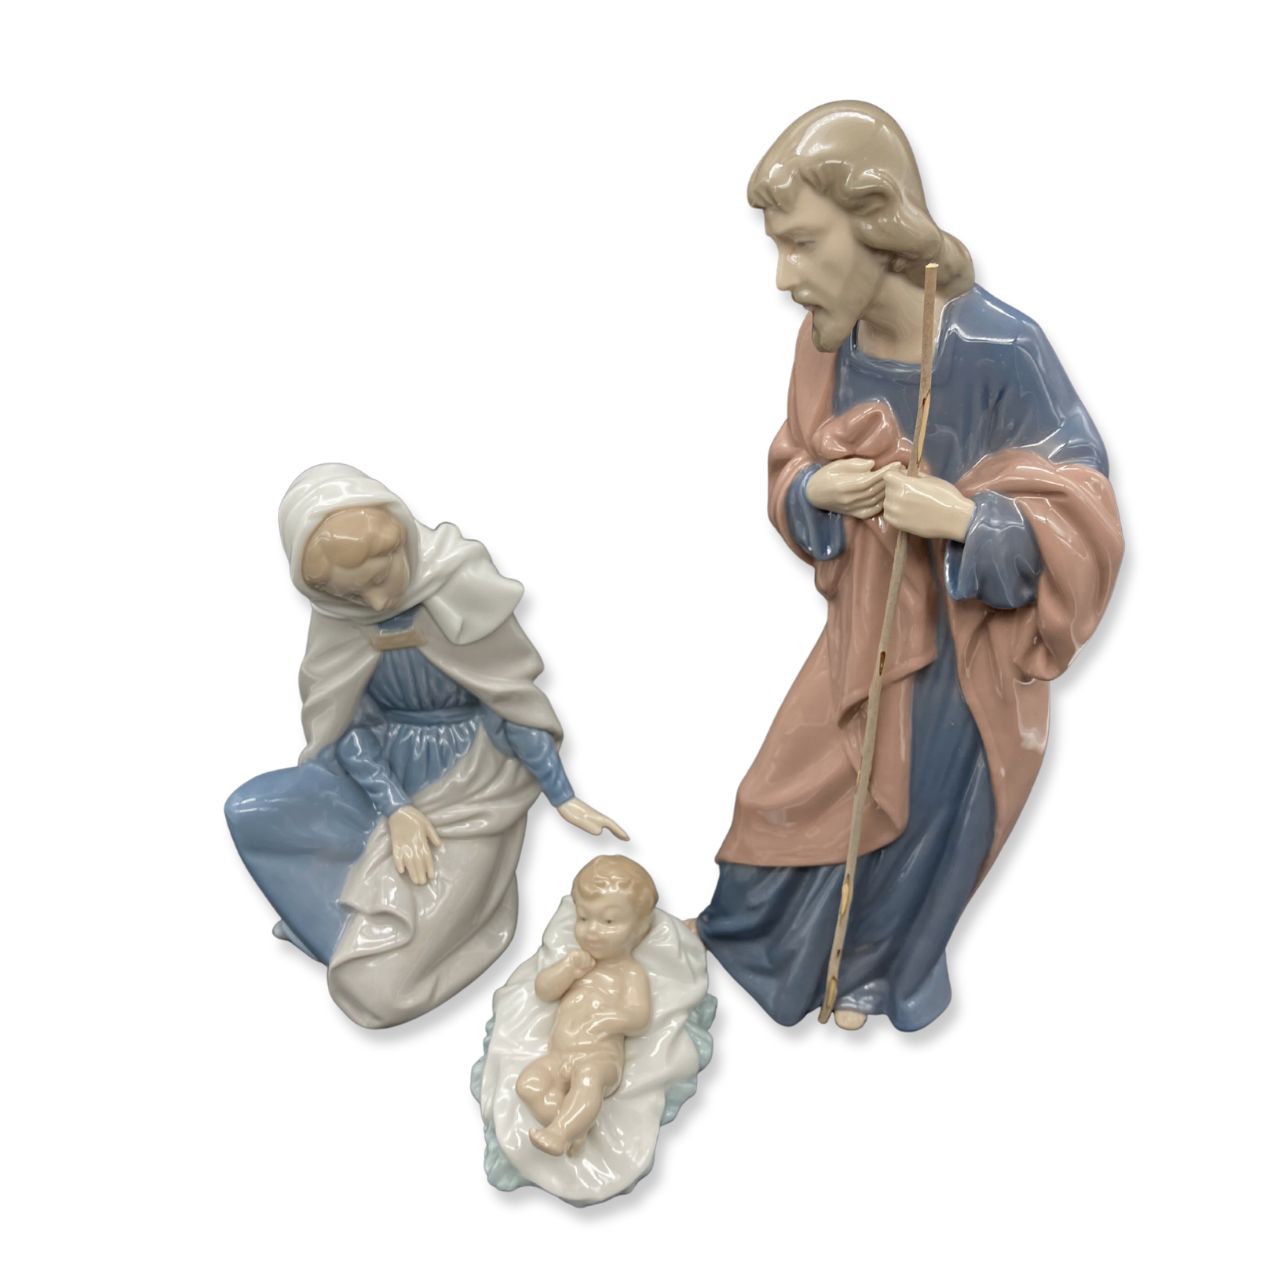 Nao by Lladro Baby Jesus  Nao porcelain figurine “Baby Jesus” from the Christmas Collection.  Sculpted by Salvador Furió, this figurine is part of the nativity set.  Nao Porcelain Figurines are produced in Valencia Spain and the Company is part of the Lladro family. Each piece is lovingly handmade and hand painted by the Valencia Artisans.